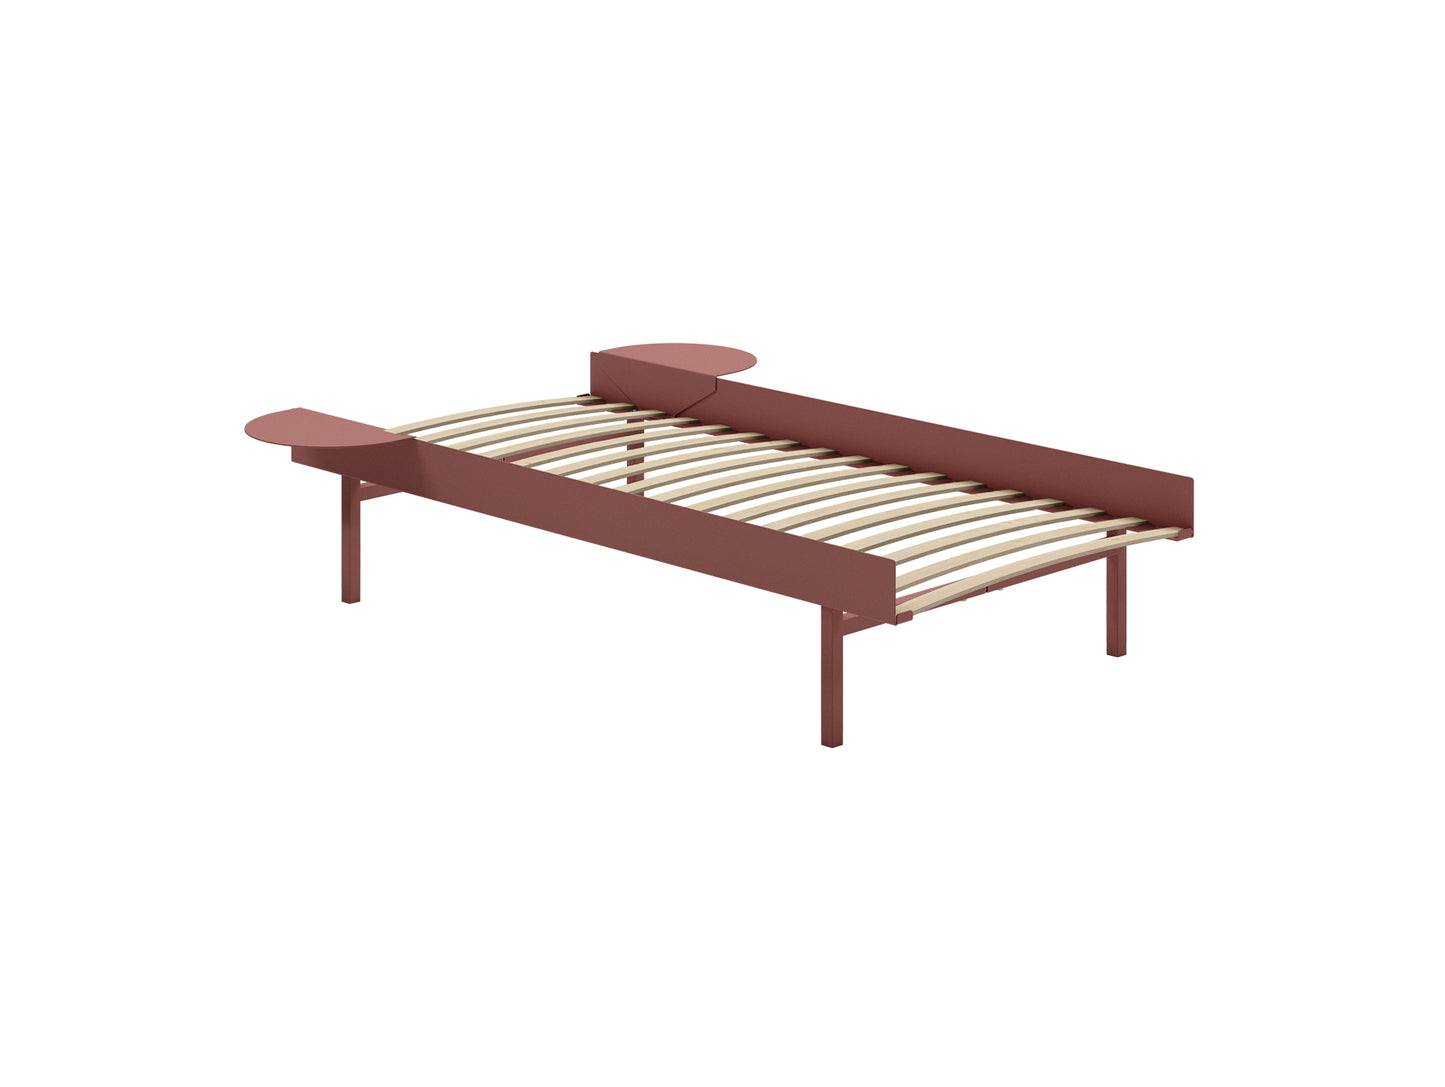 Bed 90 - 180 cm (High) by Moebe- Bed Frame / with 90cm wide Slats /  2 Side Table /  Dusty Rose